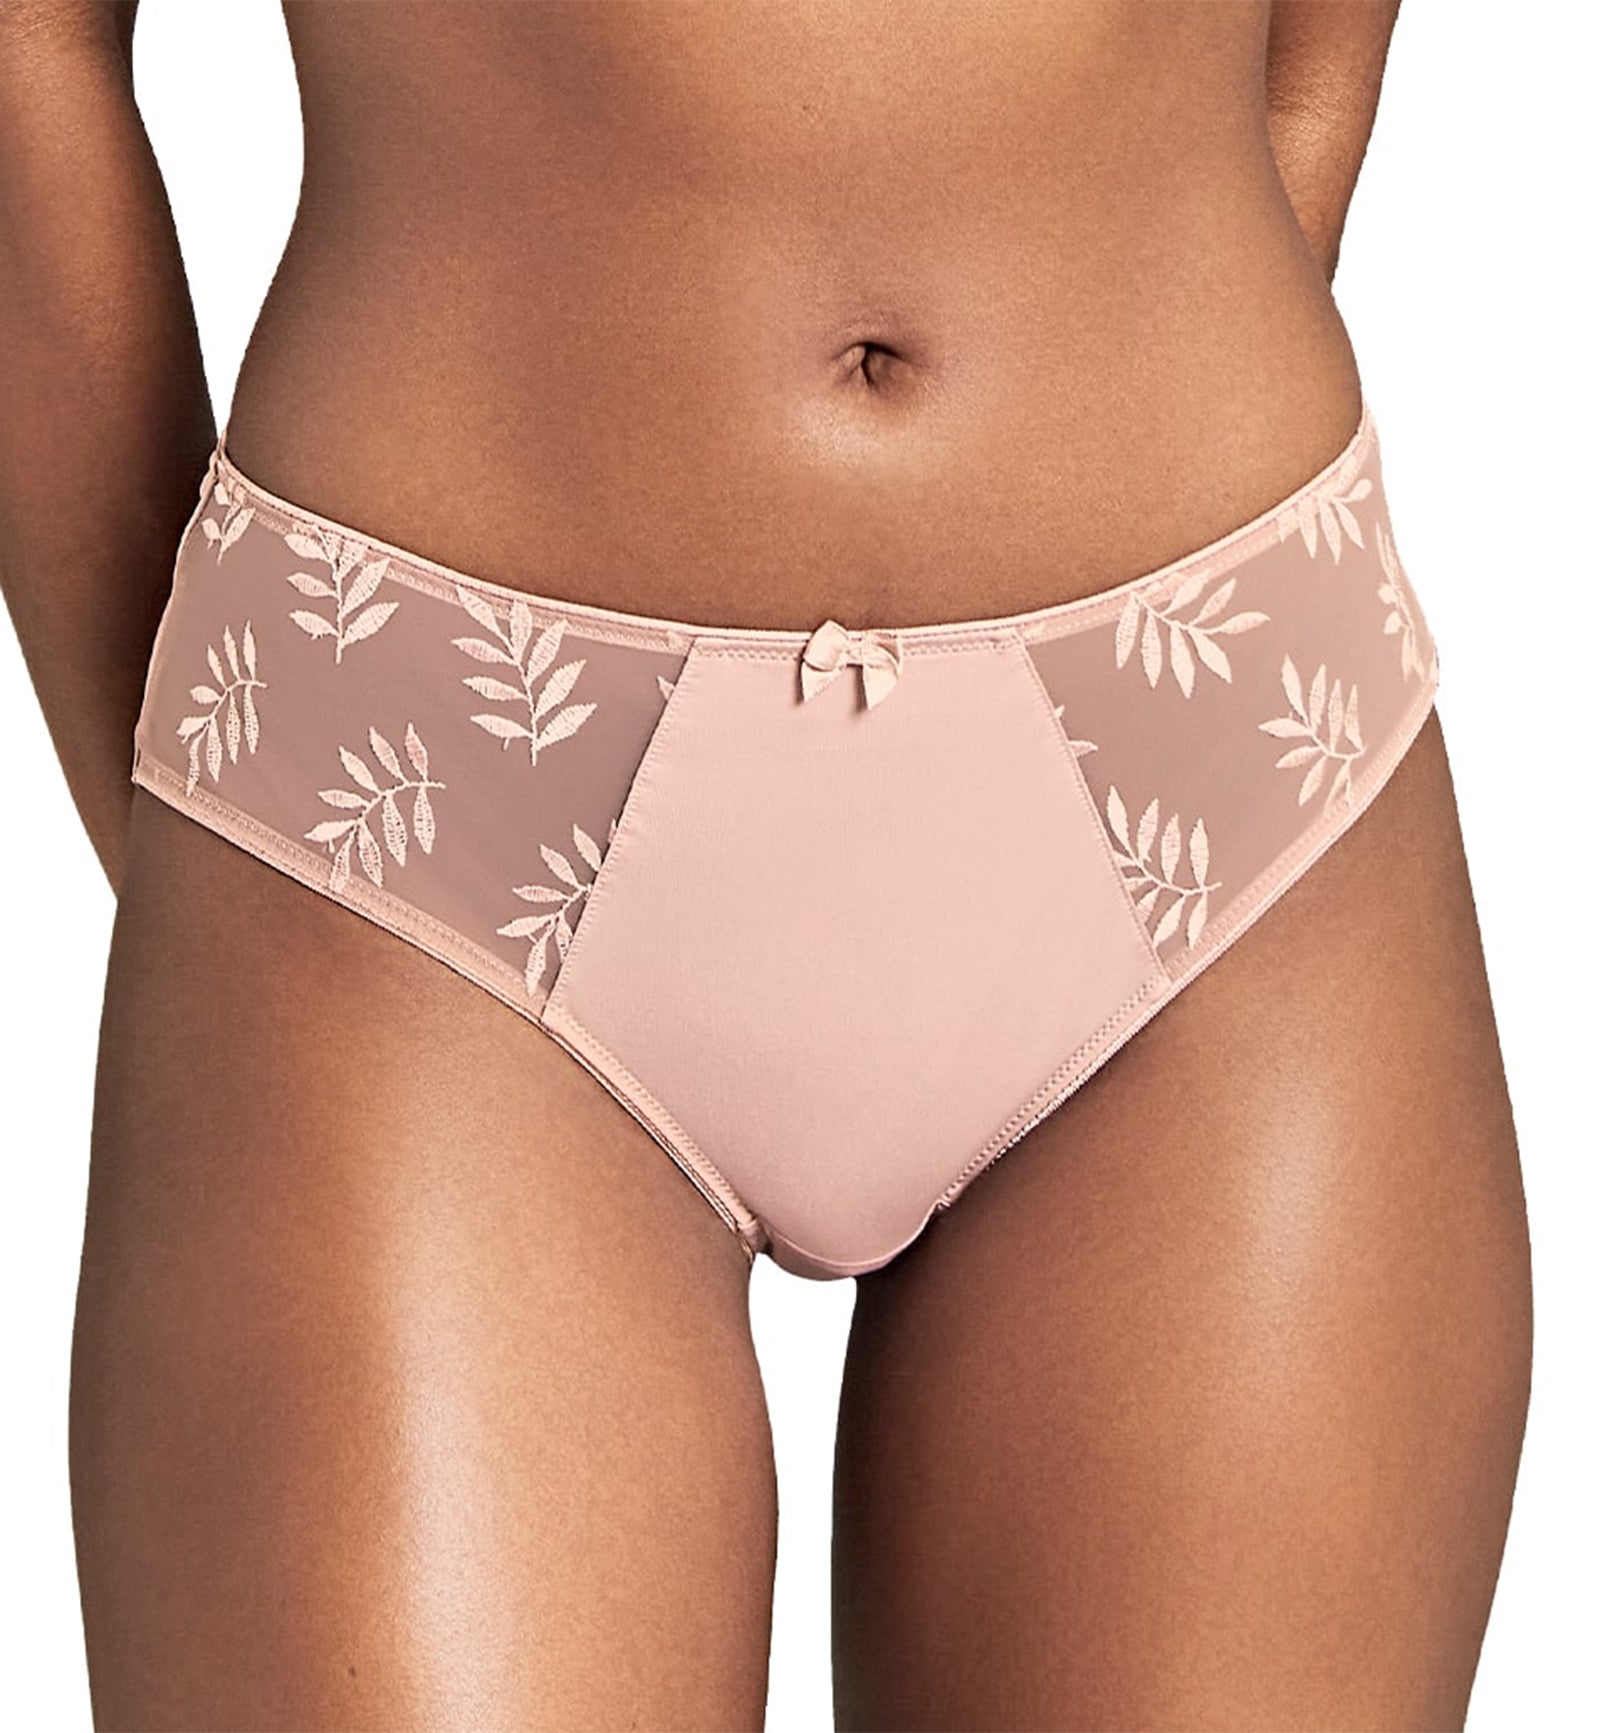 Panache Tango Matching Brief (9073),Small,Rose Dust - Rose Dust,Small